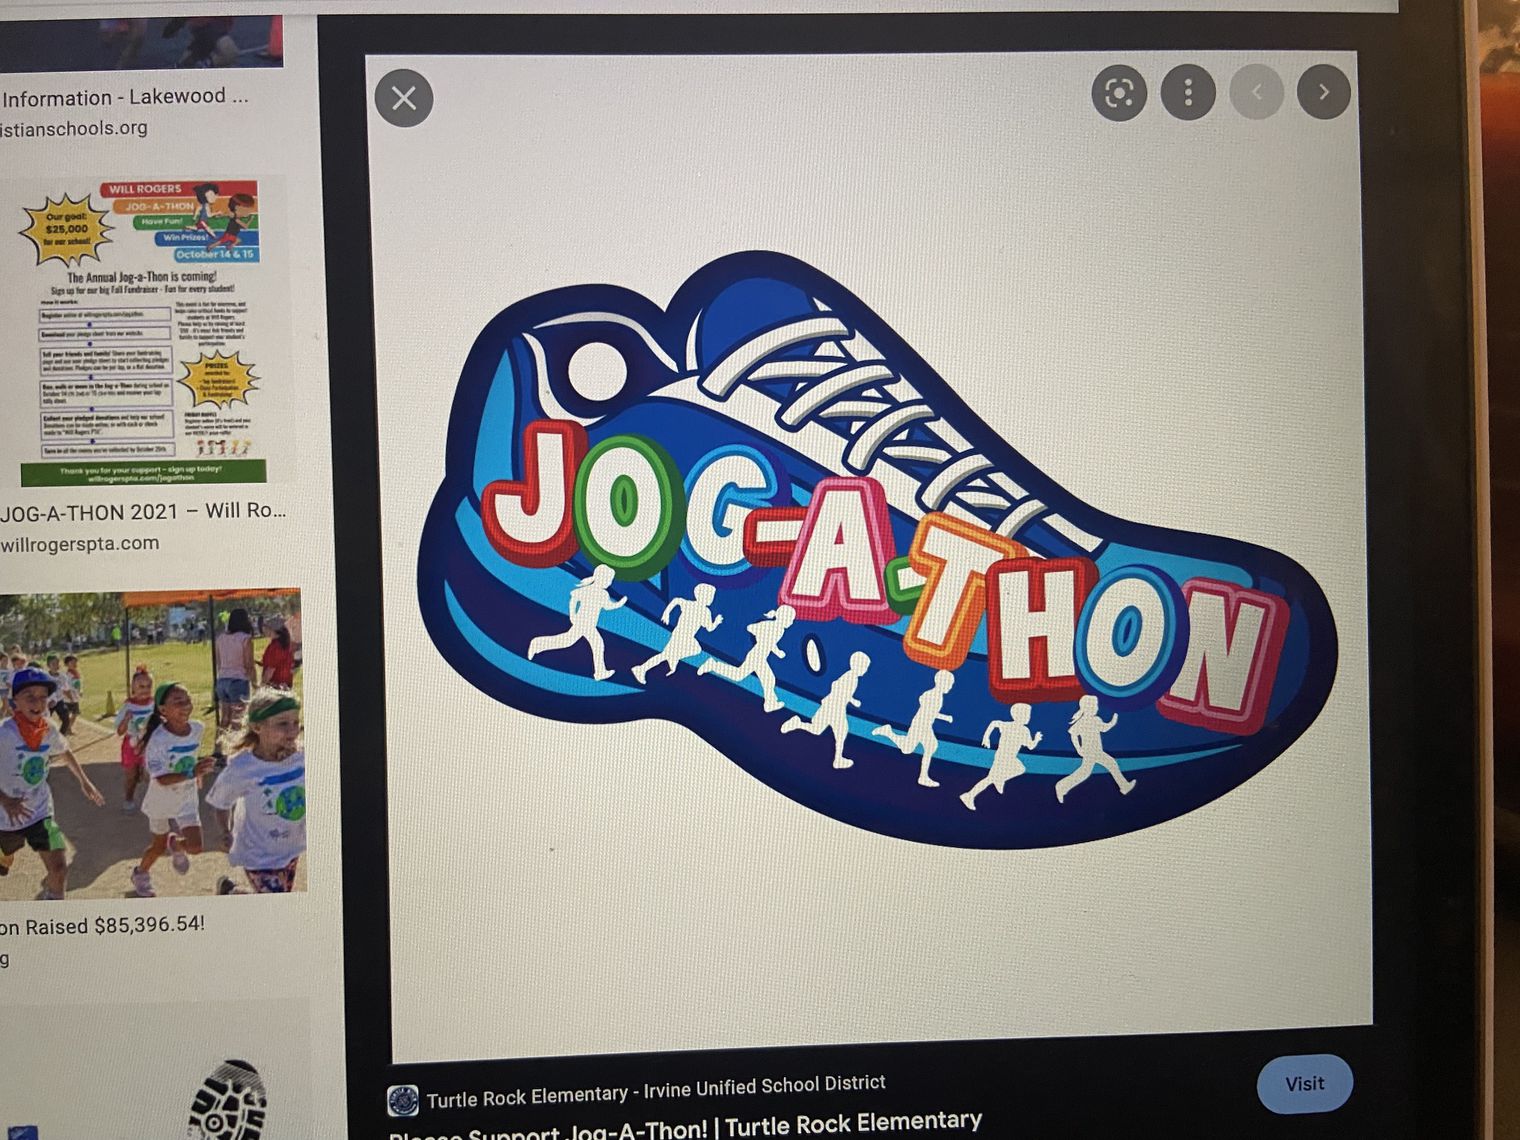 Illustrated sneaker with images of children